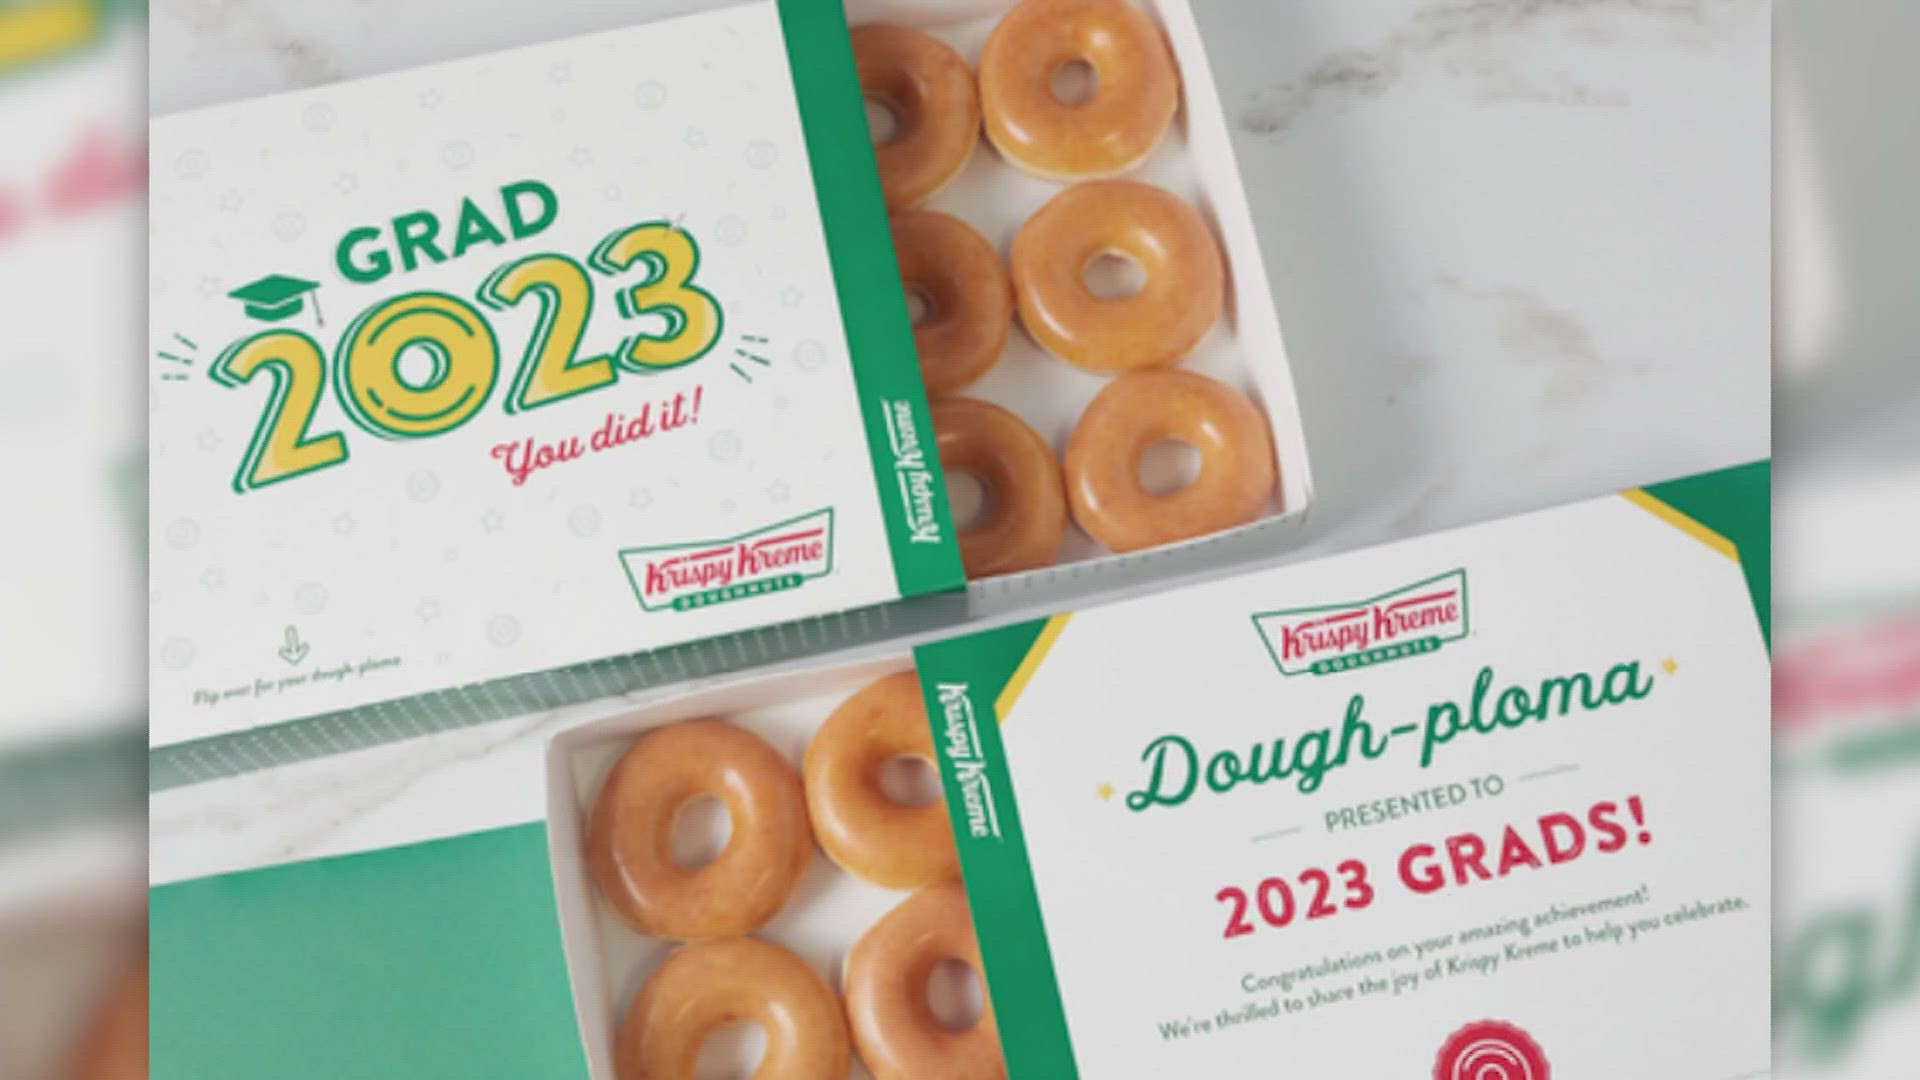 Seniors wearing any thing "Class of 2023" are eligible for a free dozen donuts.